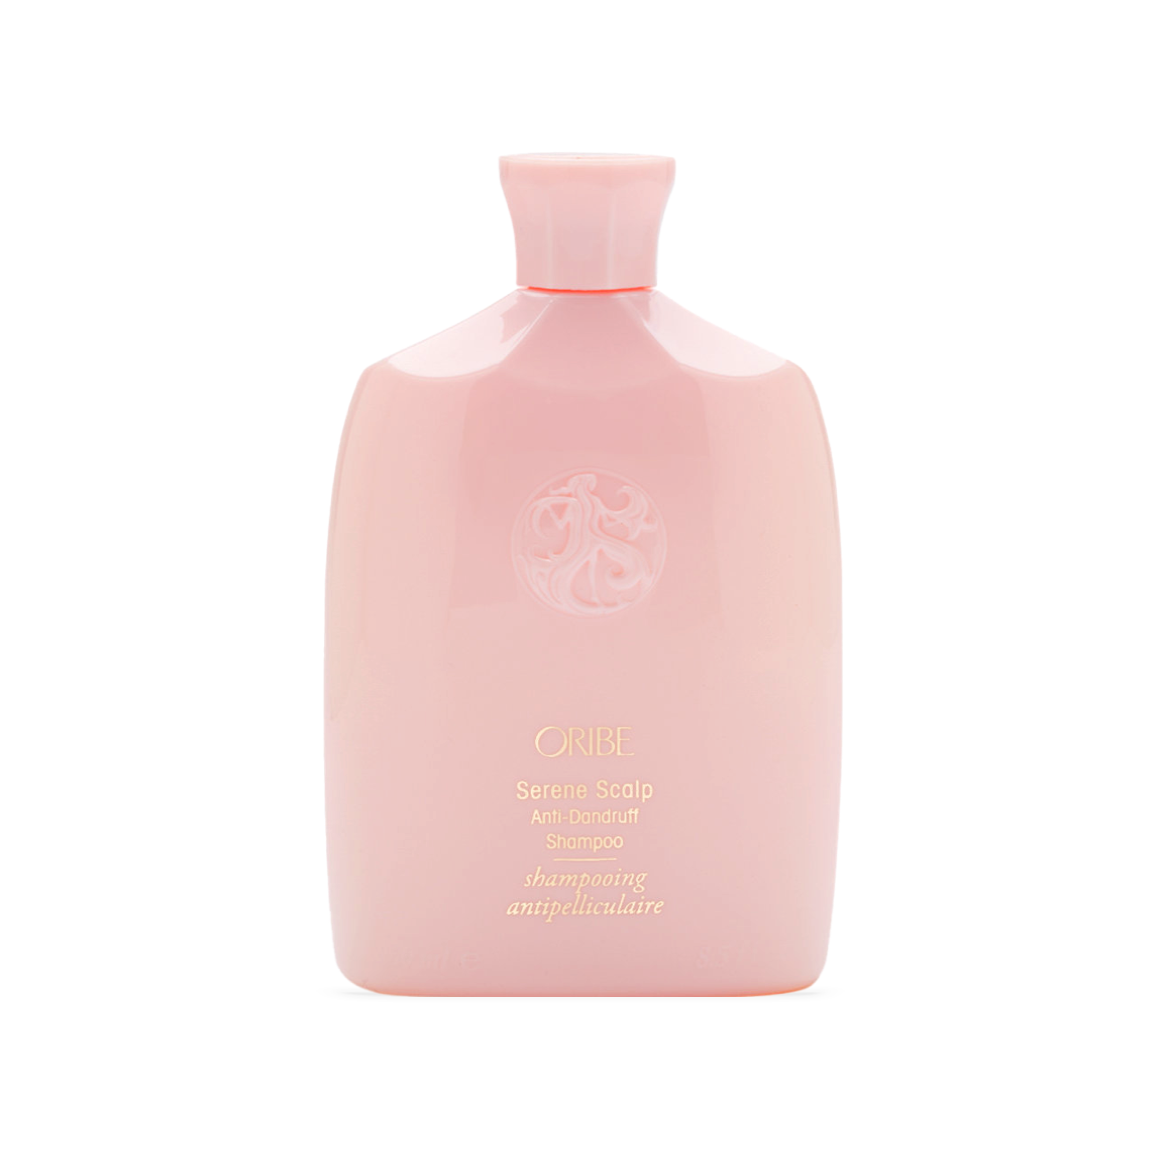 Oribe Serene Scalp Anti-Dandruff Shampoo 8.5 Oz. bottle, pale pink with elegant branding, a luxury hair care product designed to soothe, moisturize, and treat dandruff-prone scalps.